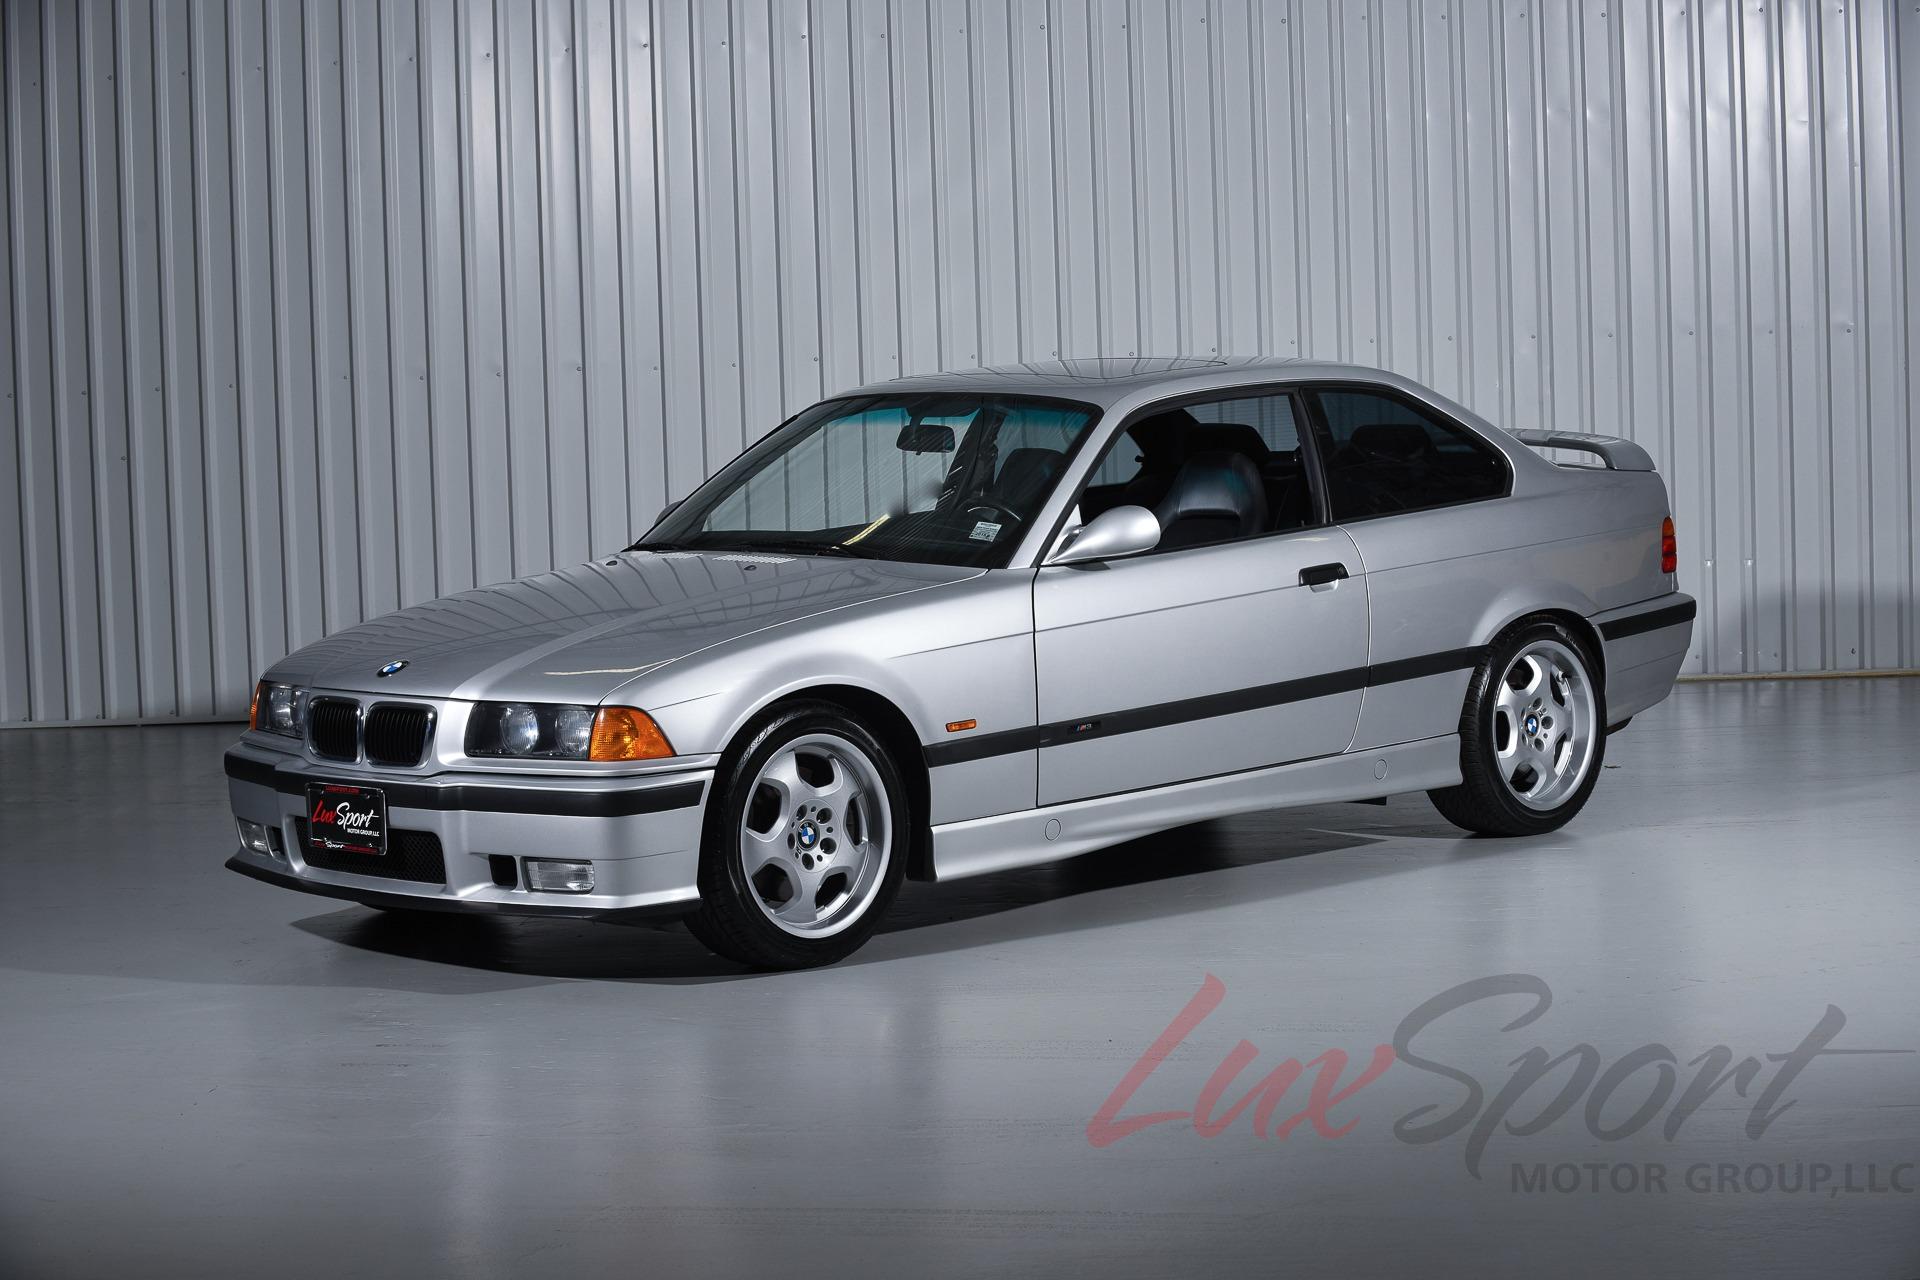 redactioneel voorkomen Dokter 1999 BMW E36 M3 Coupe Stock # 1999121 for sale near Syosset, NY | NY BMW  Dealer